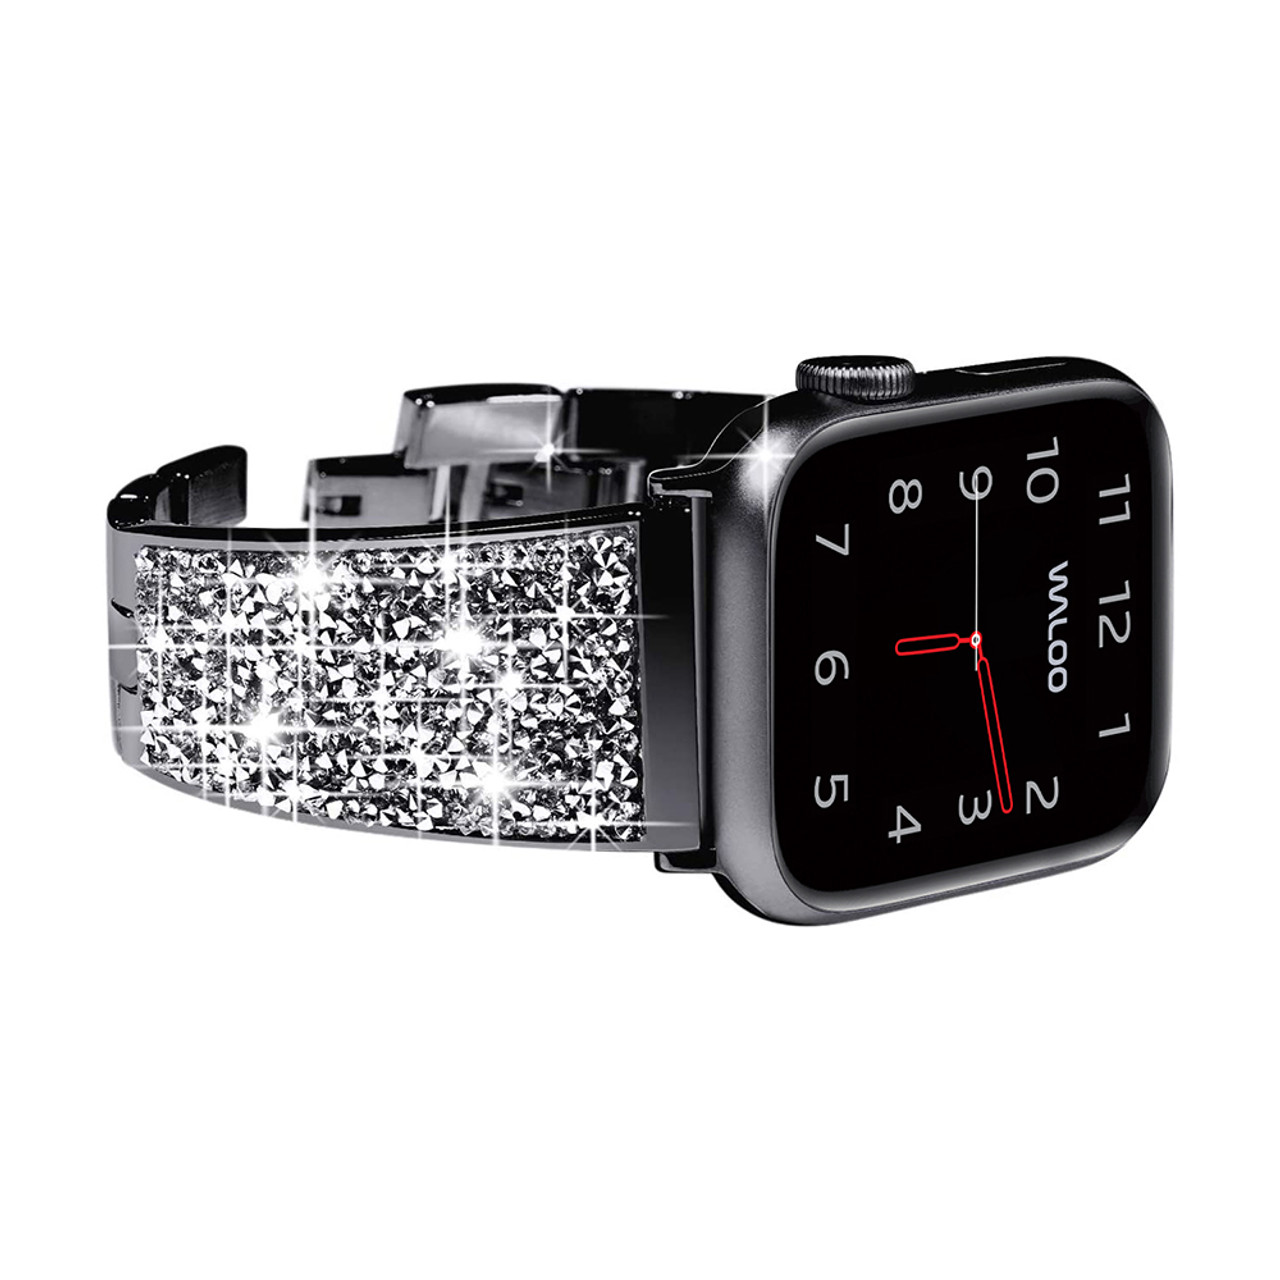 Diamond-Studded Bracelet Bands for All Apple Watch Models product image